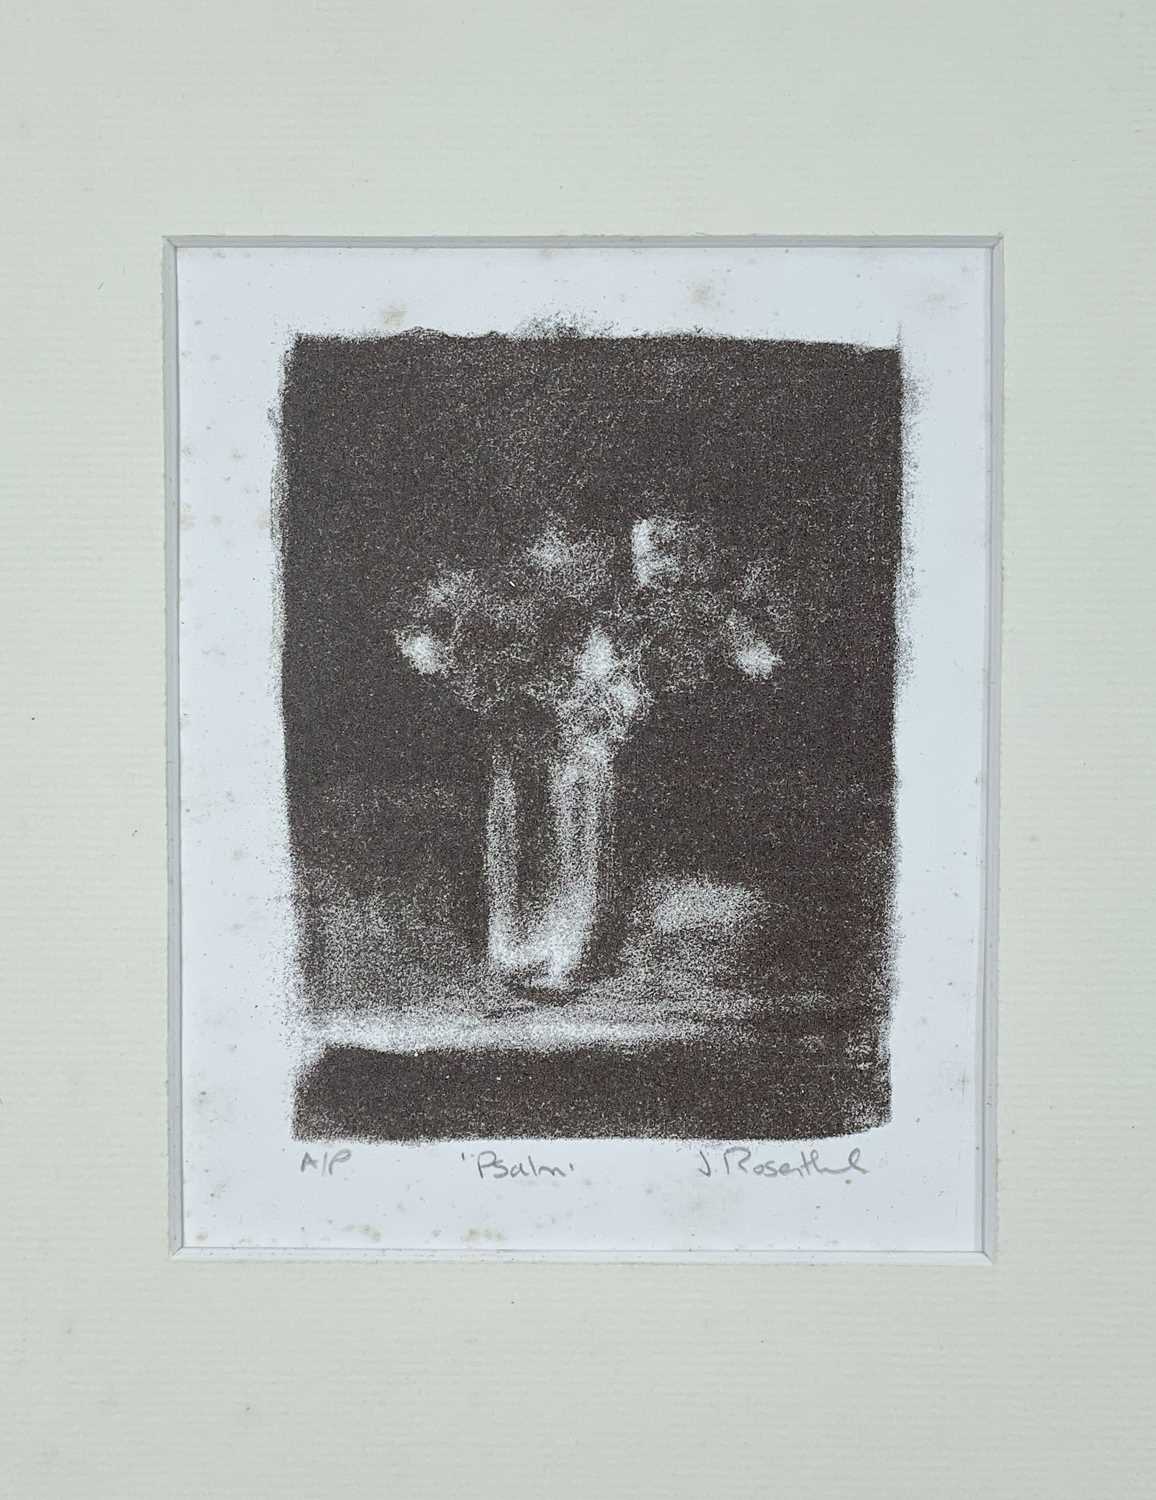 ‡ JUDITH ROSENTHAL limited edition (artists proof) monochrome print - entitled, 'Psalm', signed in